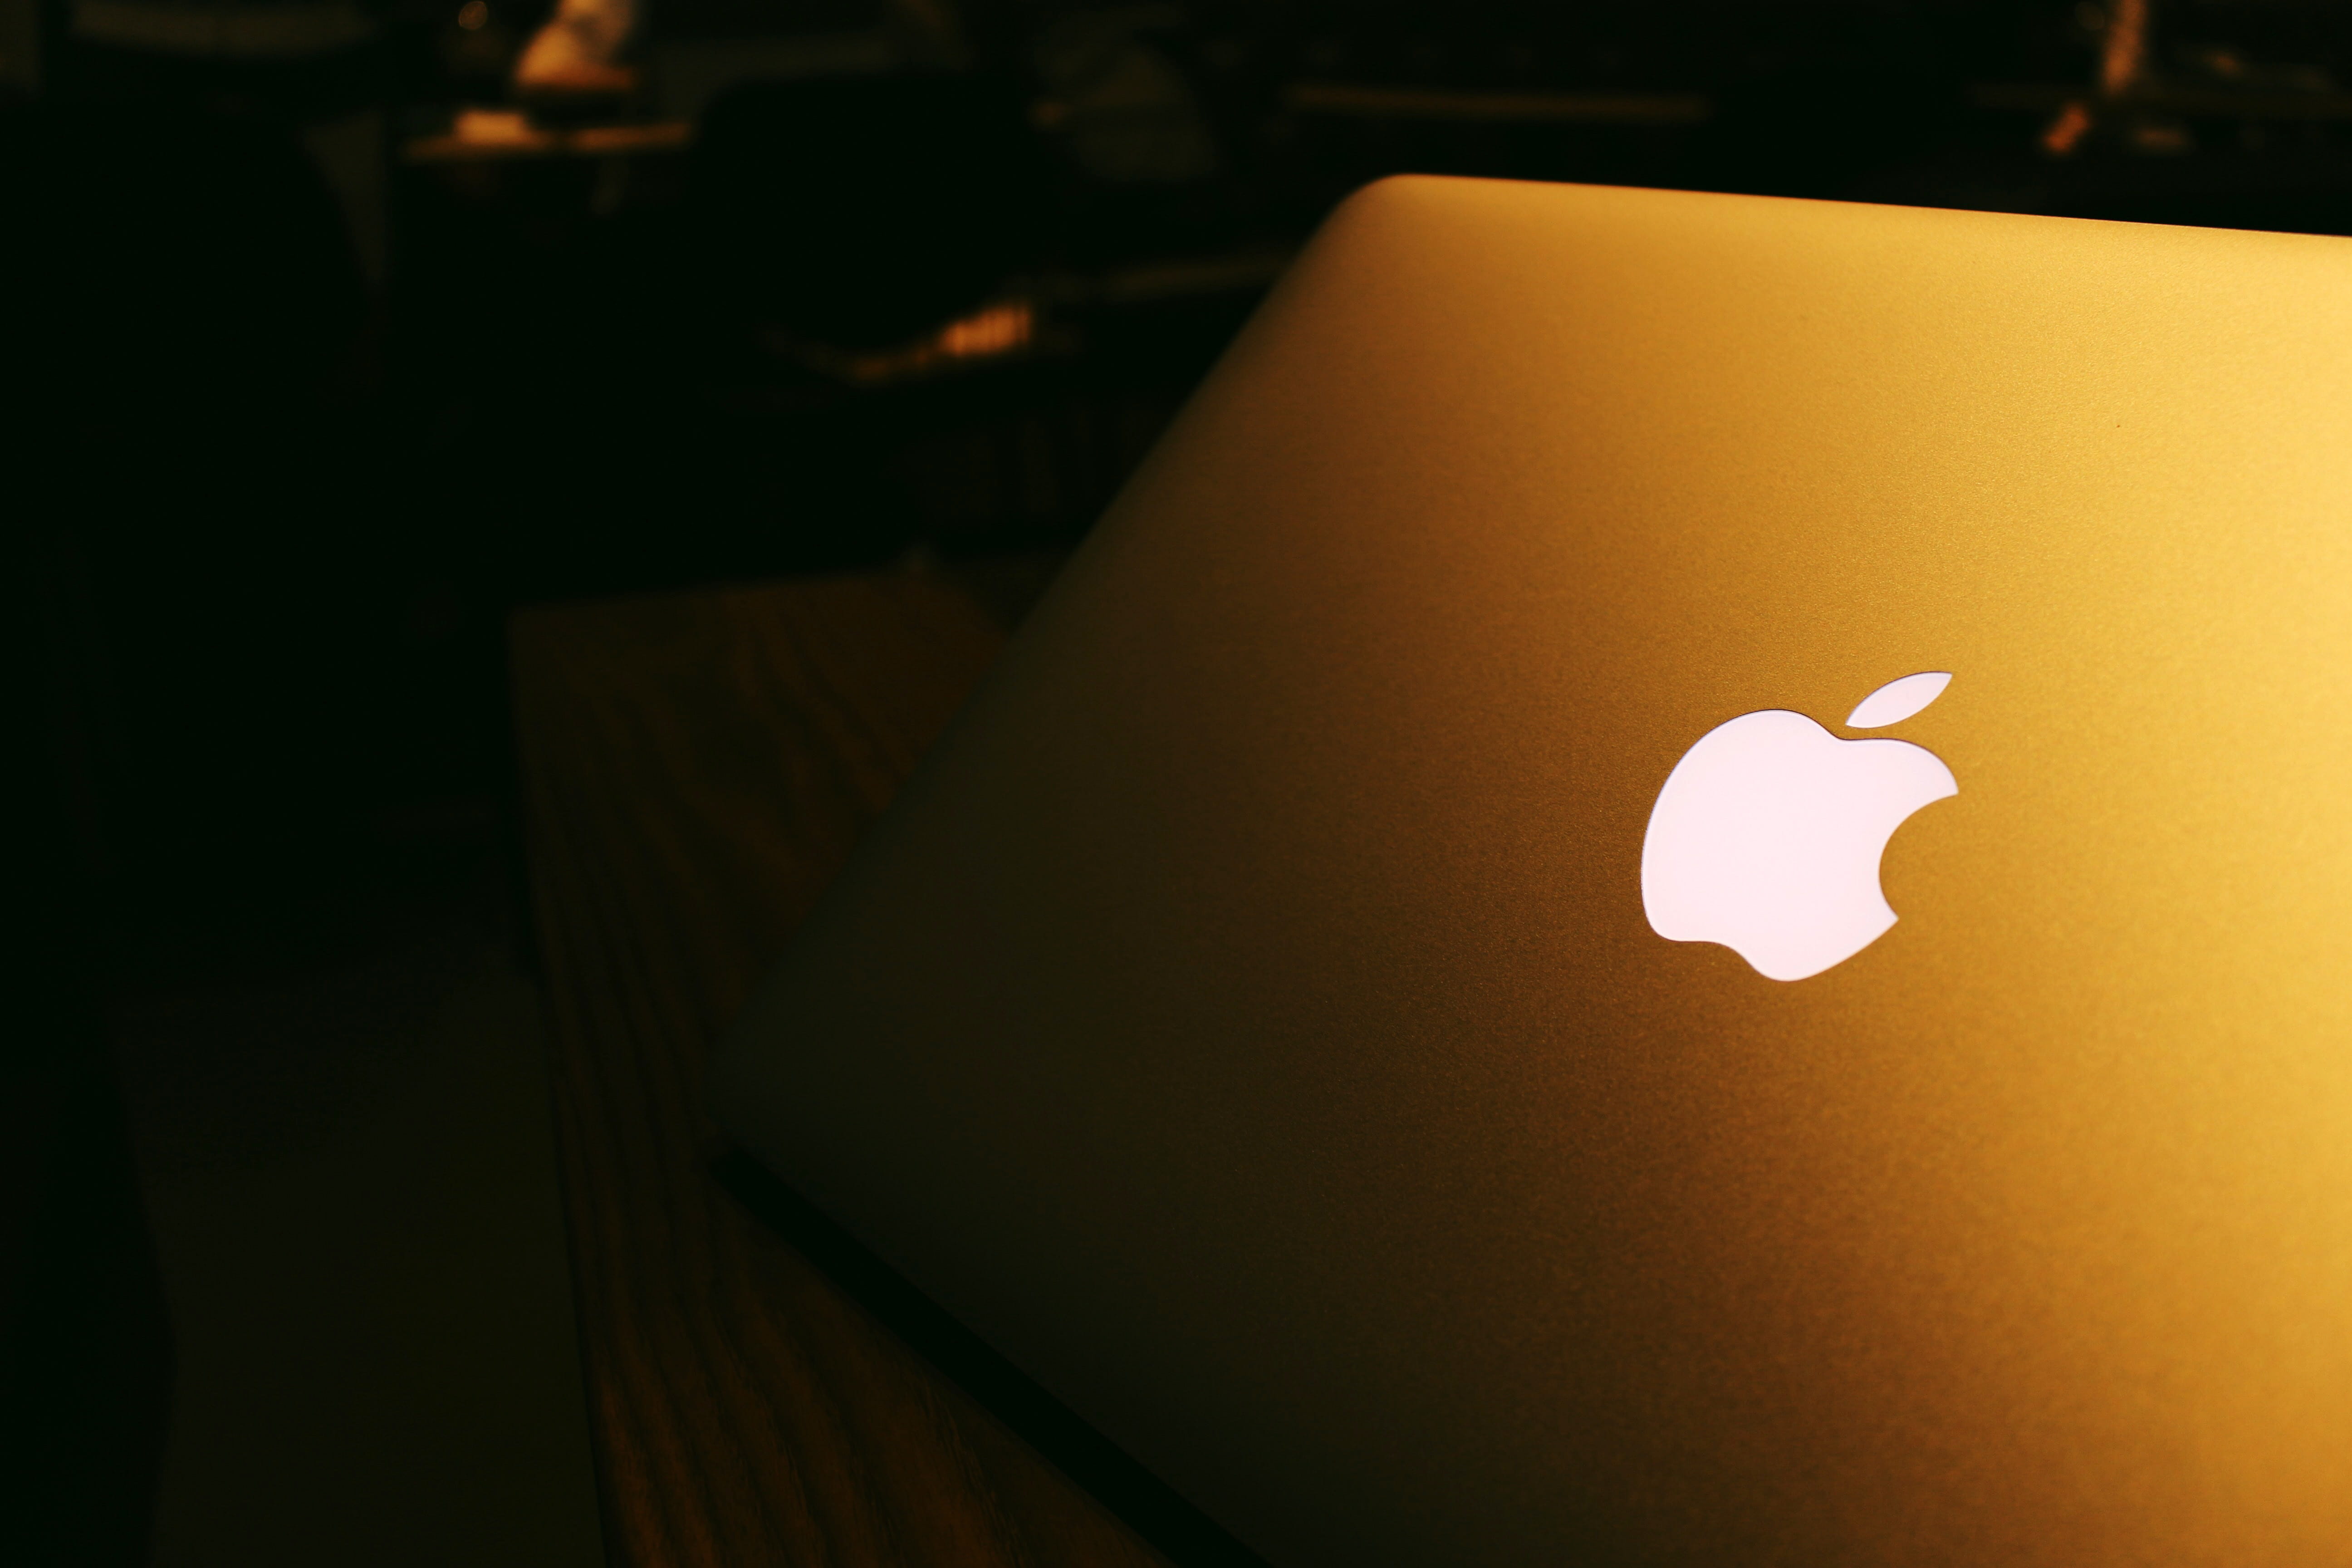 Macbook Pro at night with apple logo, lighted, public domain